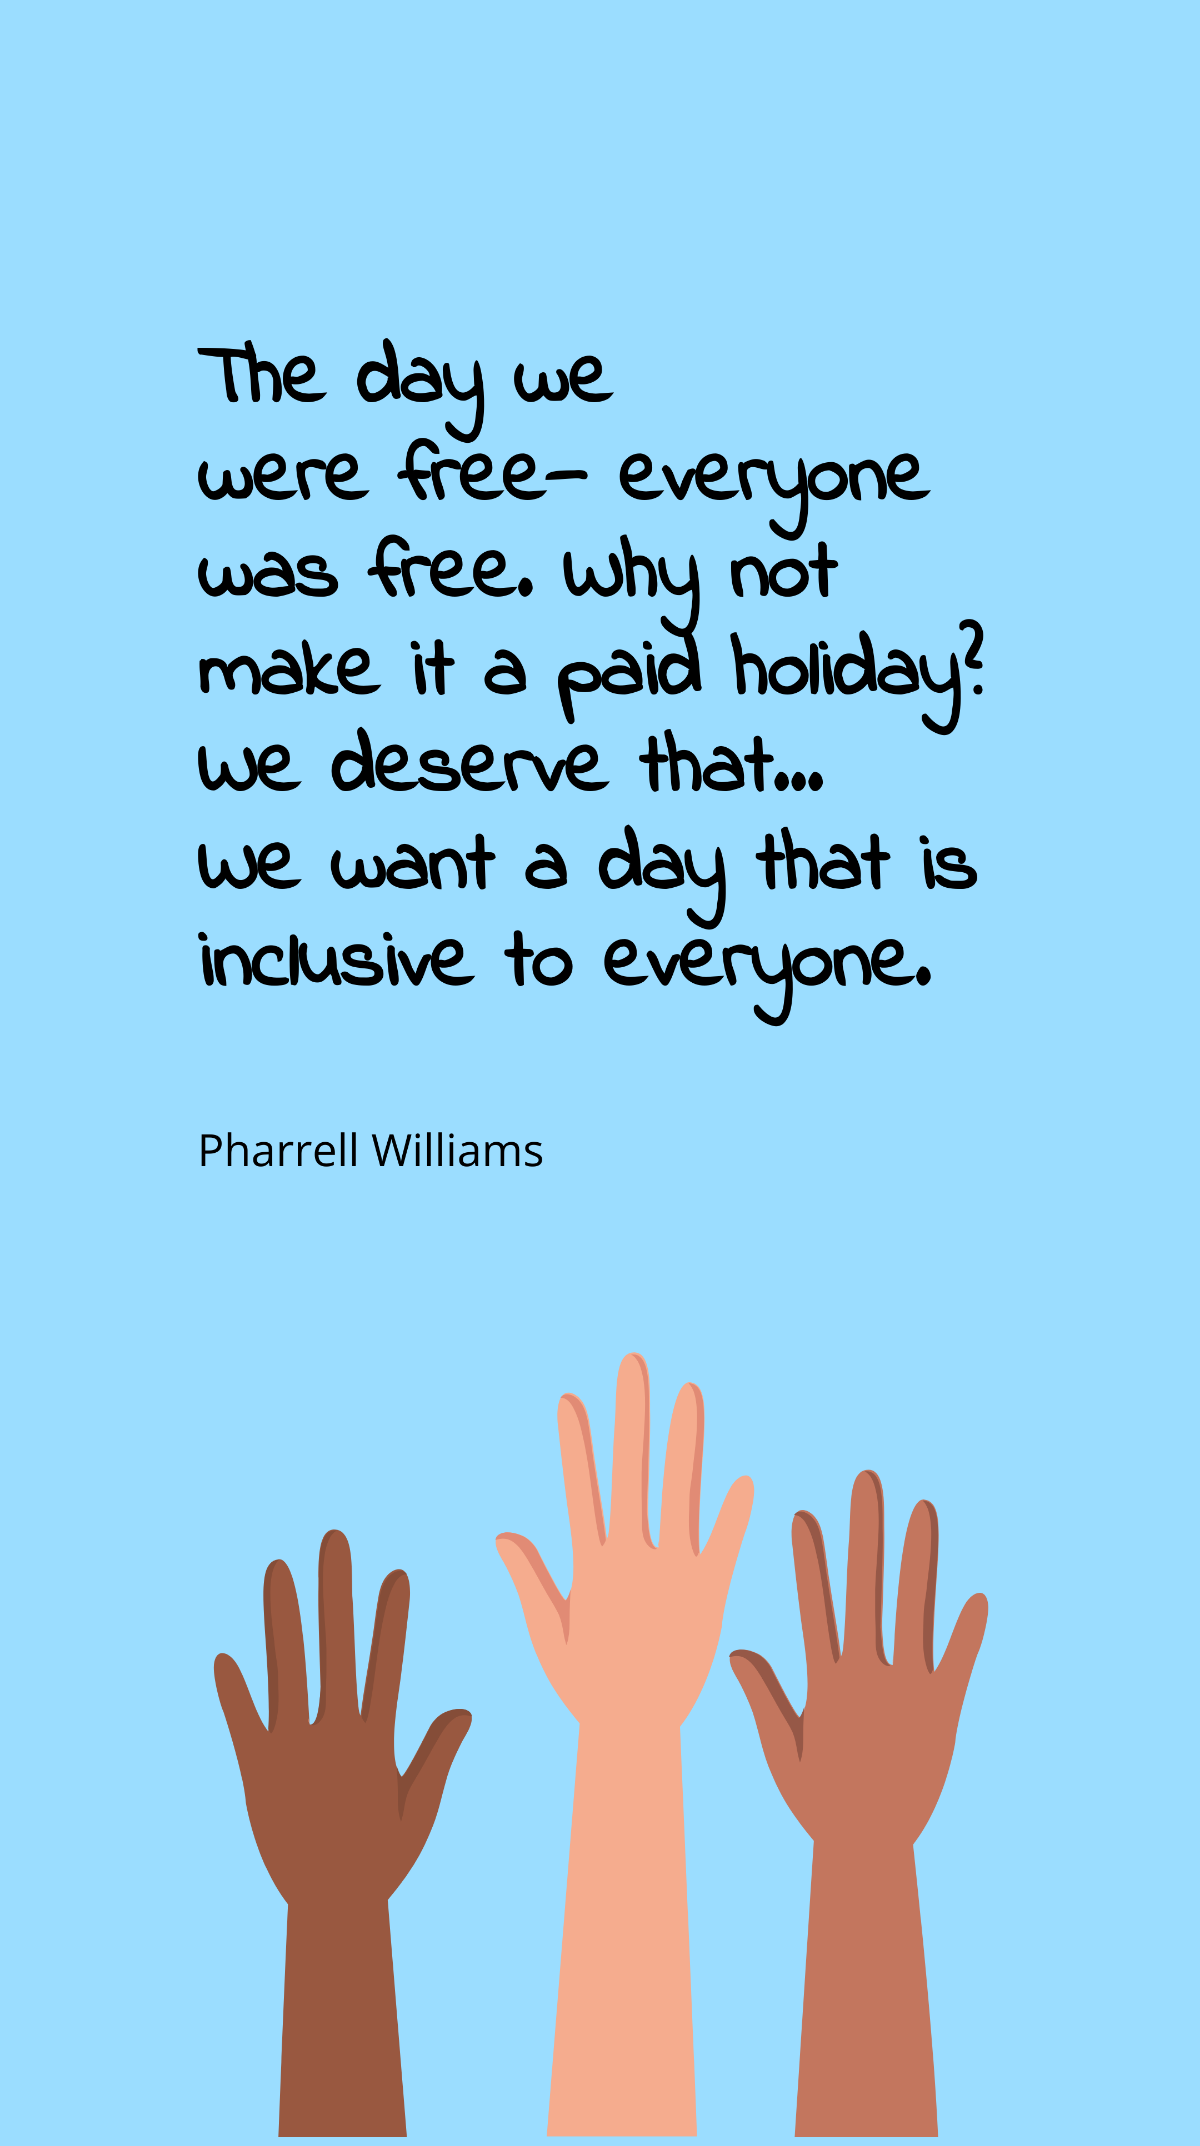 Pharrell Williams - The day we were free—everyone was free. Why not make it a paid holiday? We deserve that…We want a day that is inclusive to everyone. Template